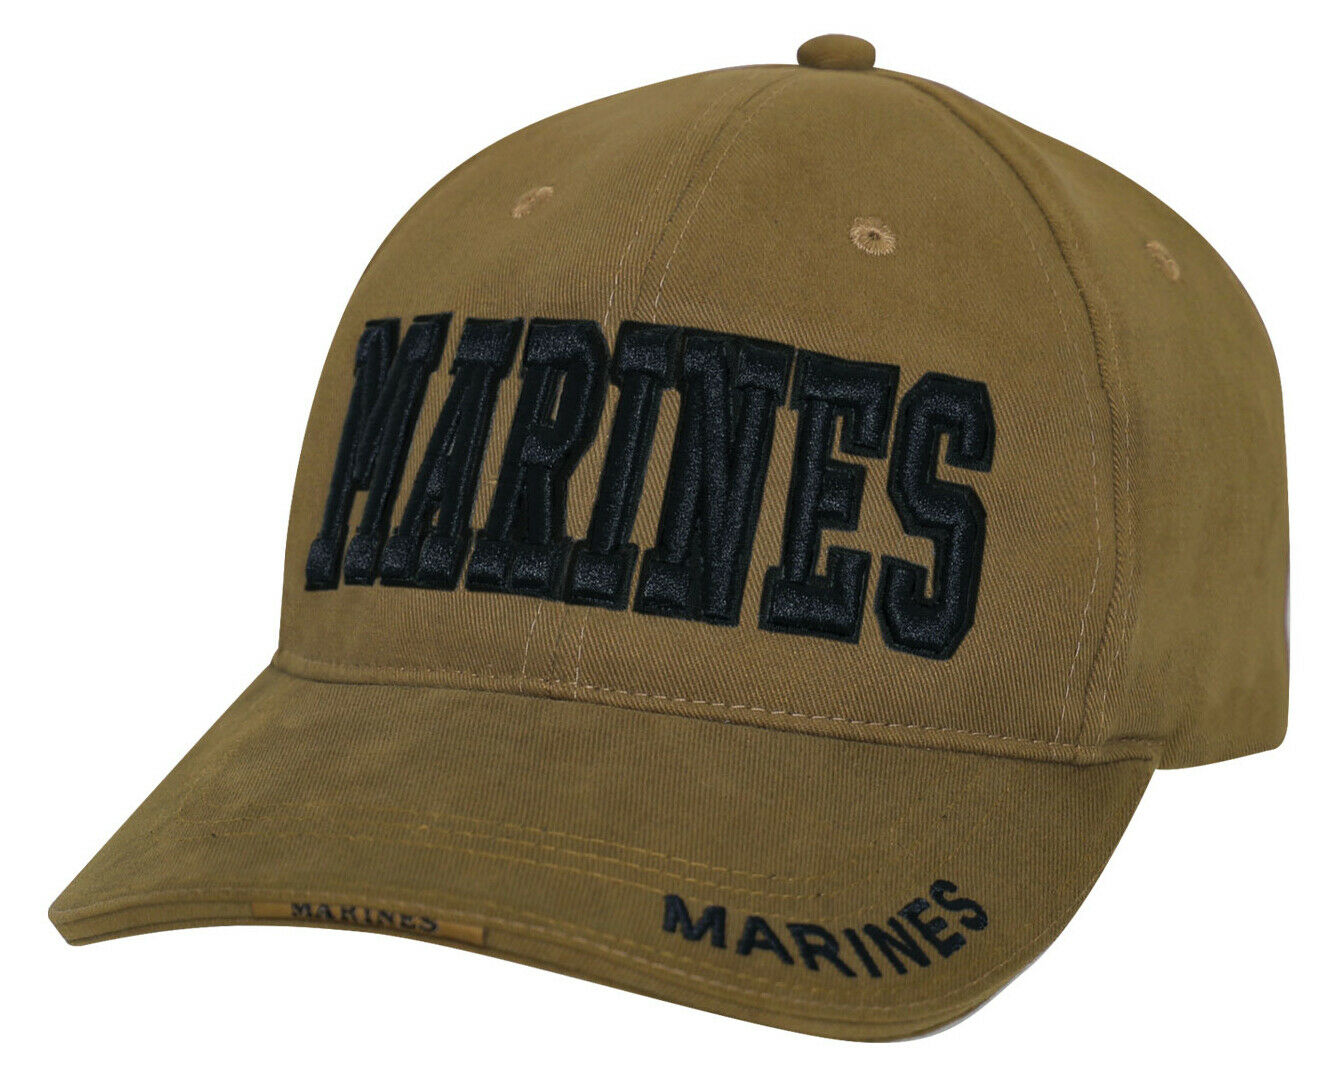 Rothco Deluxe Marines Low Profile Insignia Cap - Coyote Brown